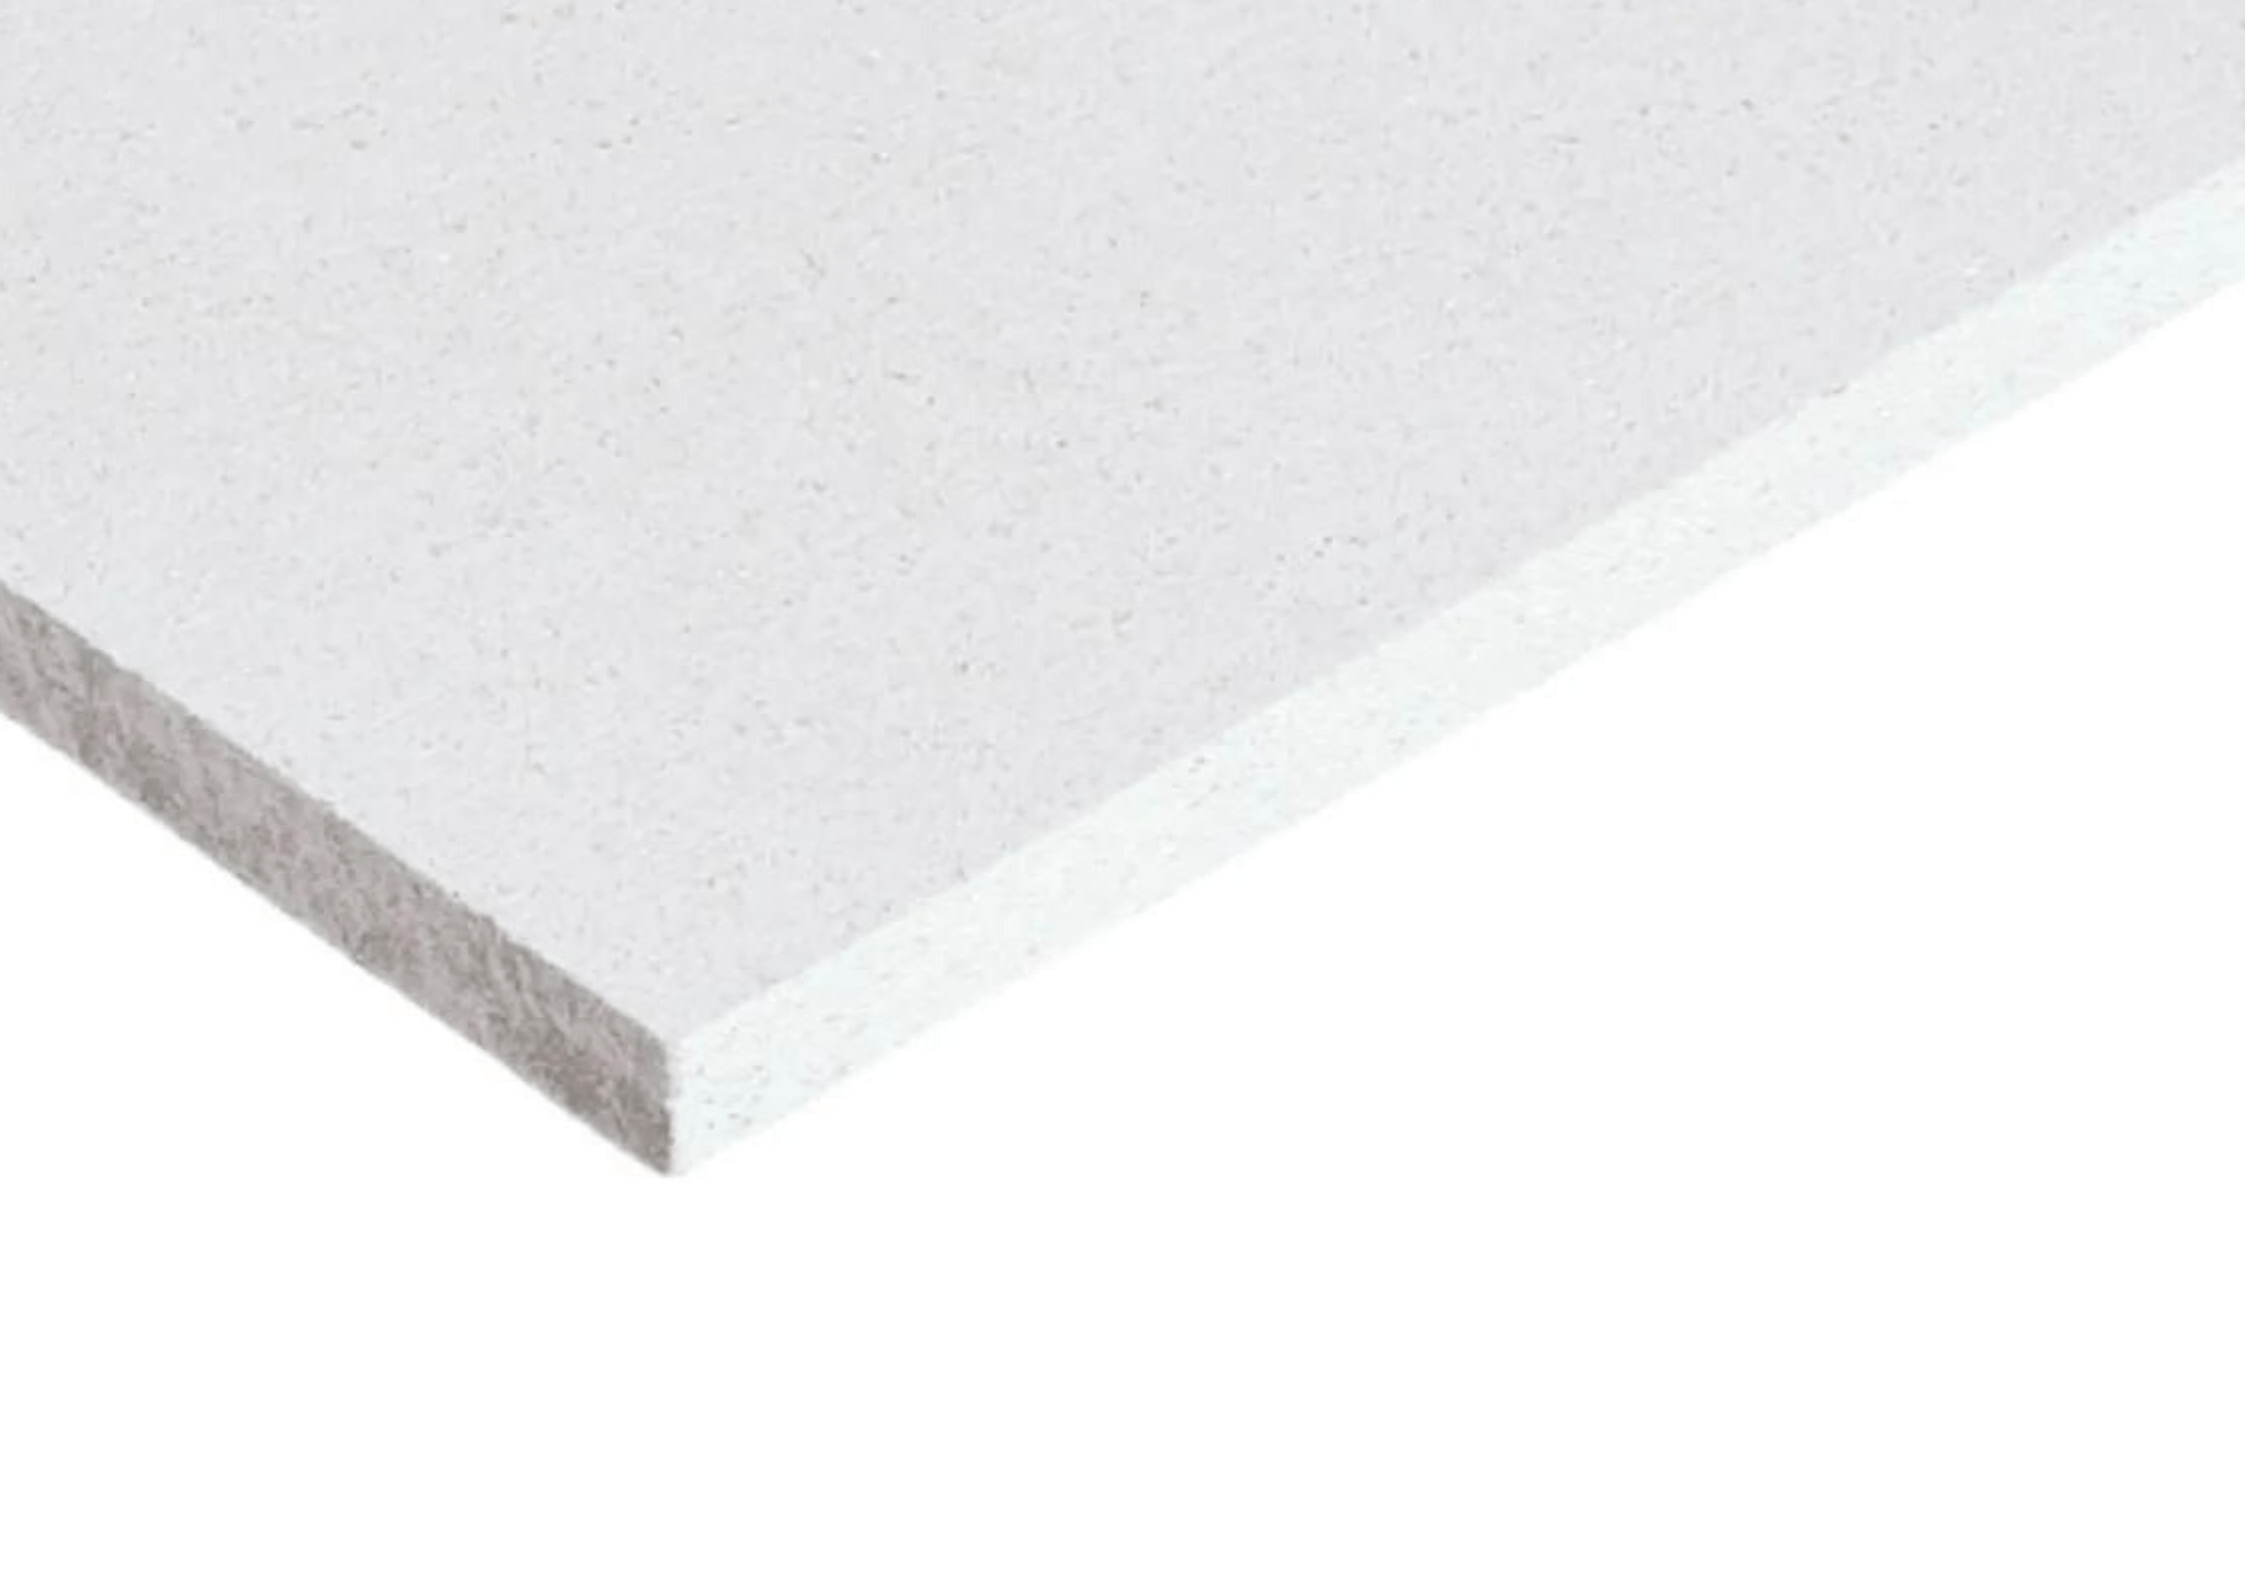 Fermacell Insulation 10mm fermacell® High Performance Wall Board 2400 x 1200mm